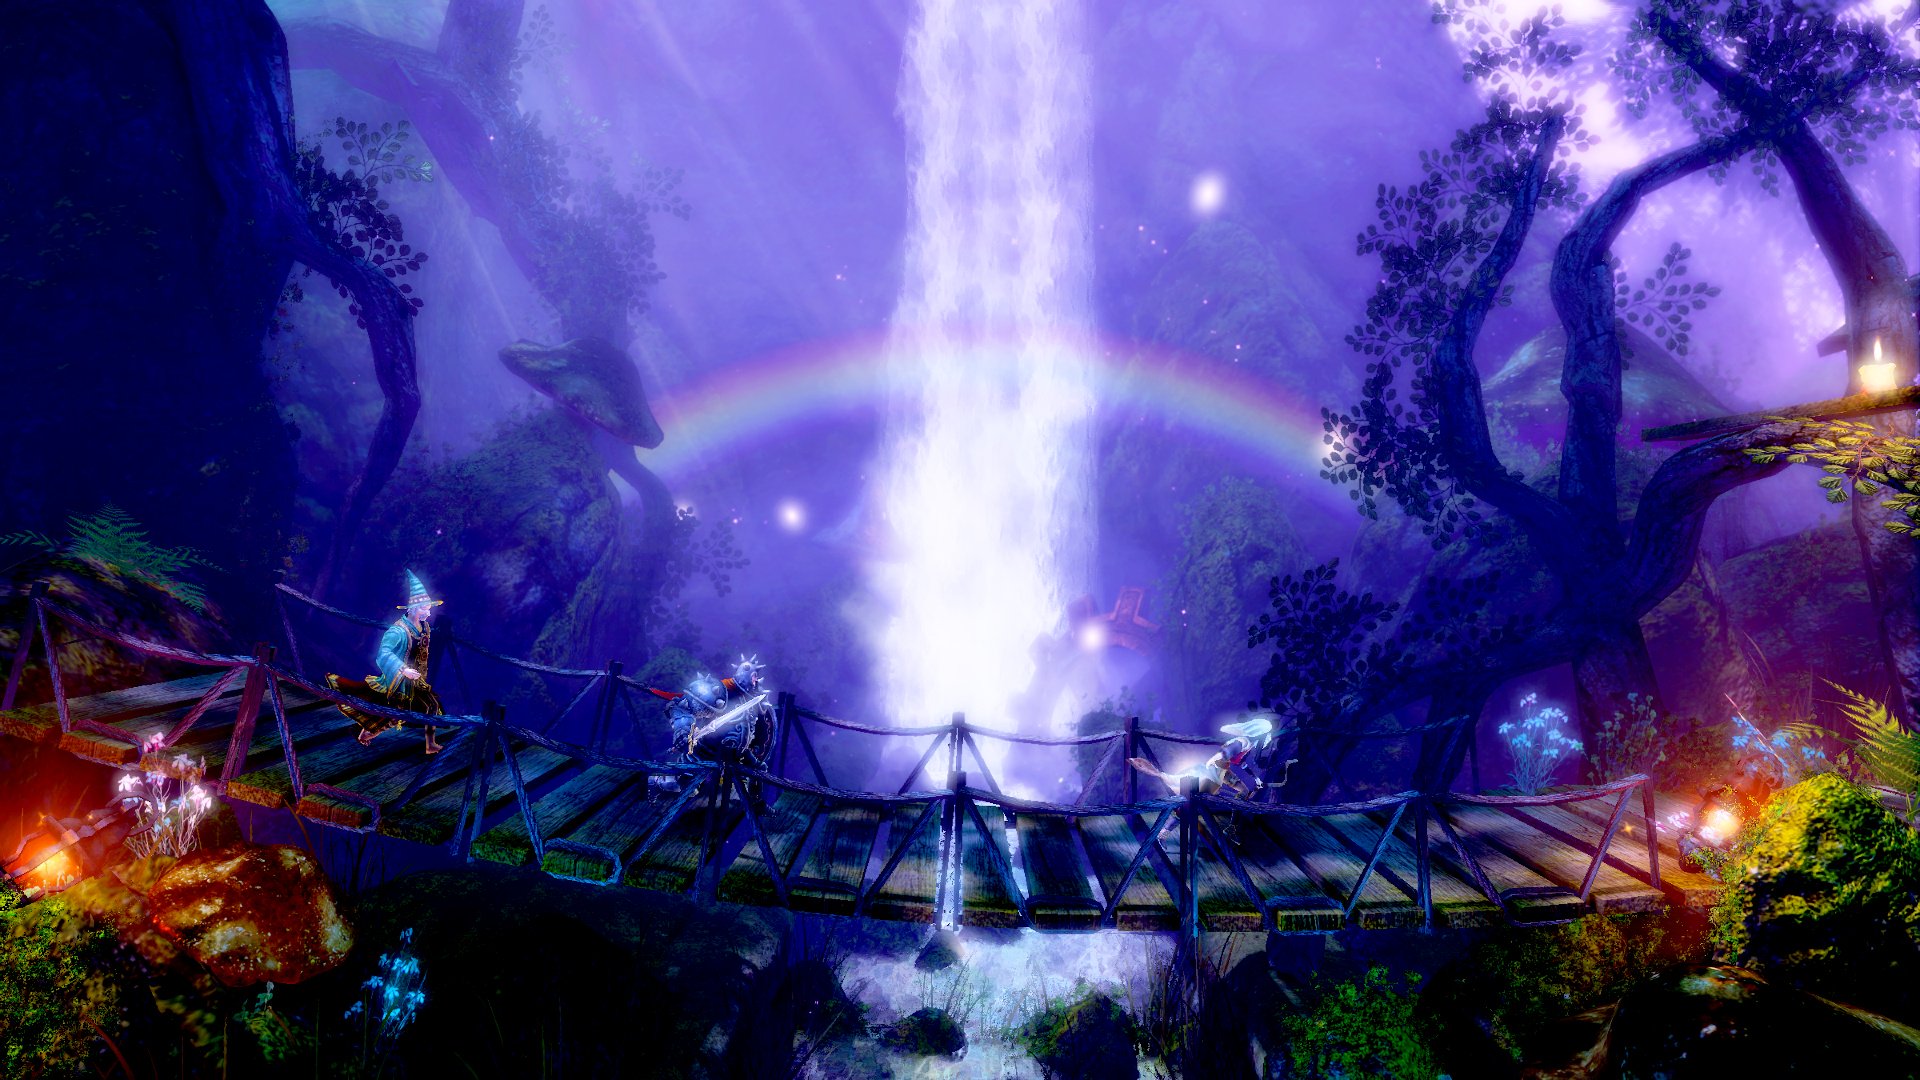 Trine enchanted trophy guide